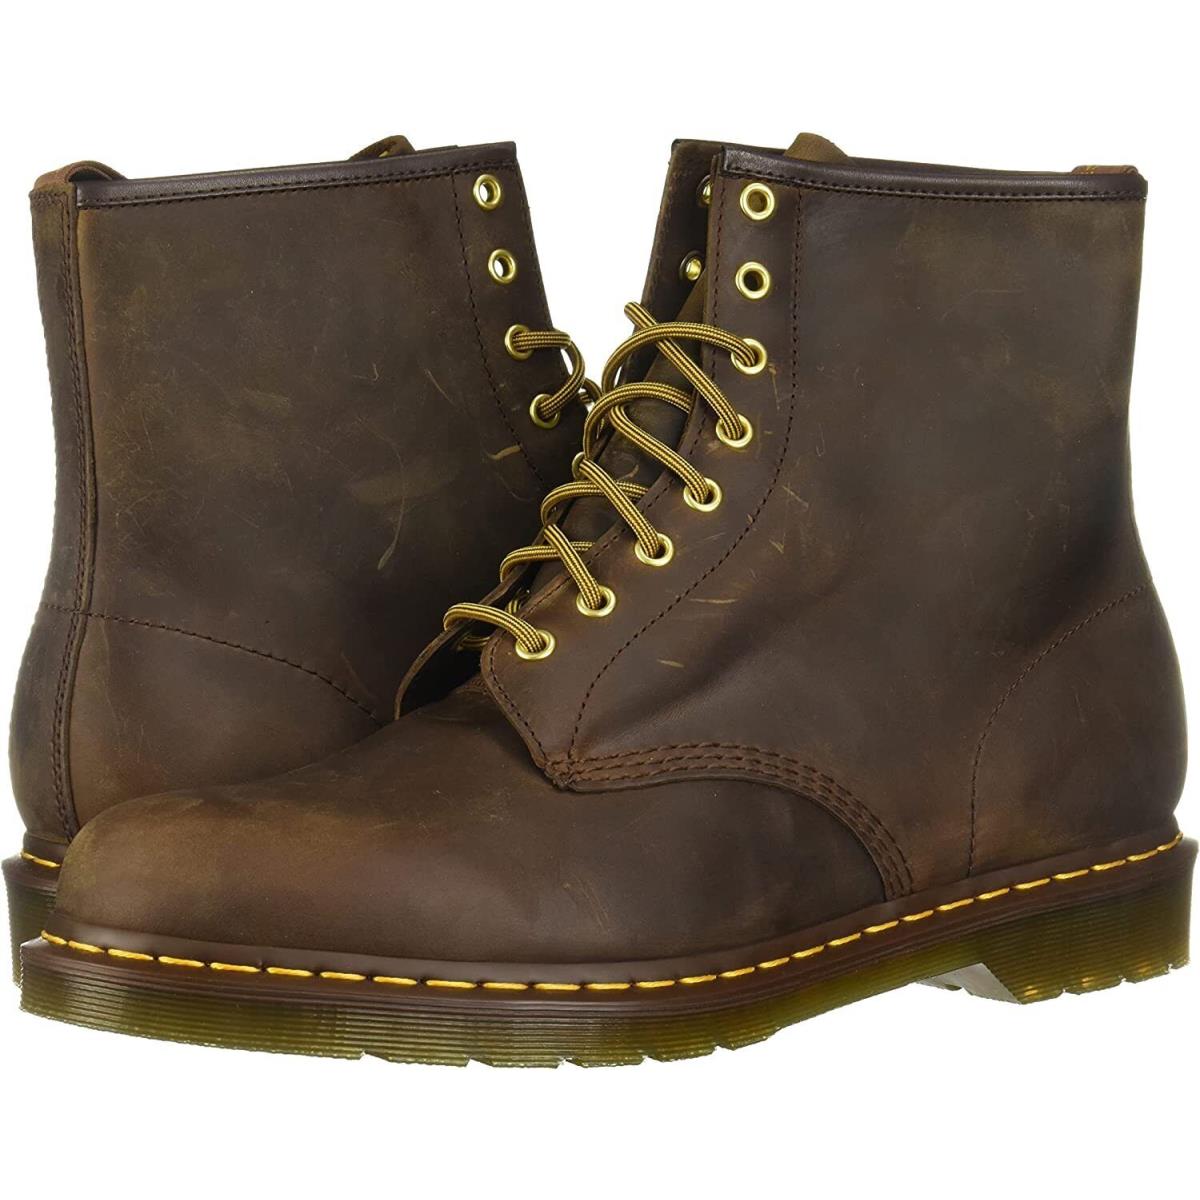 Mens Shoes Dr. Martens 1460 8 Eye Leather Boots 11822200 Aztec Brown Crazy Horse - Brown